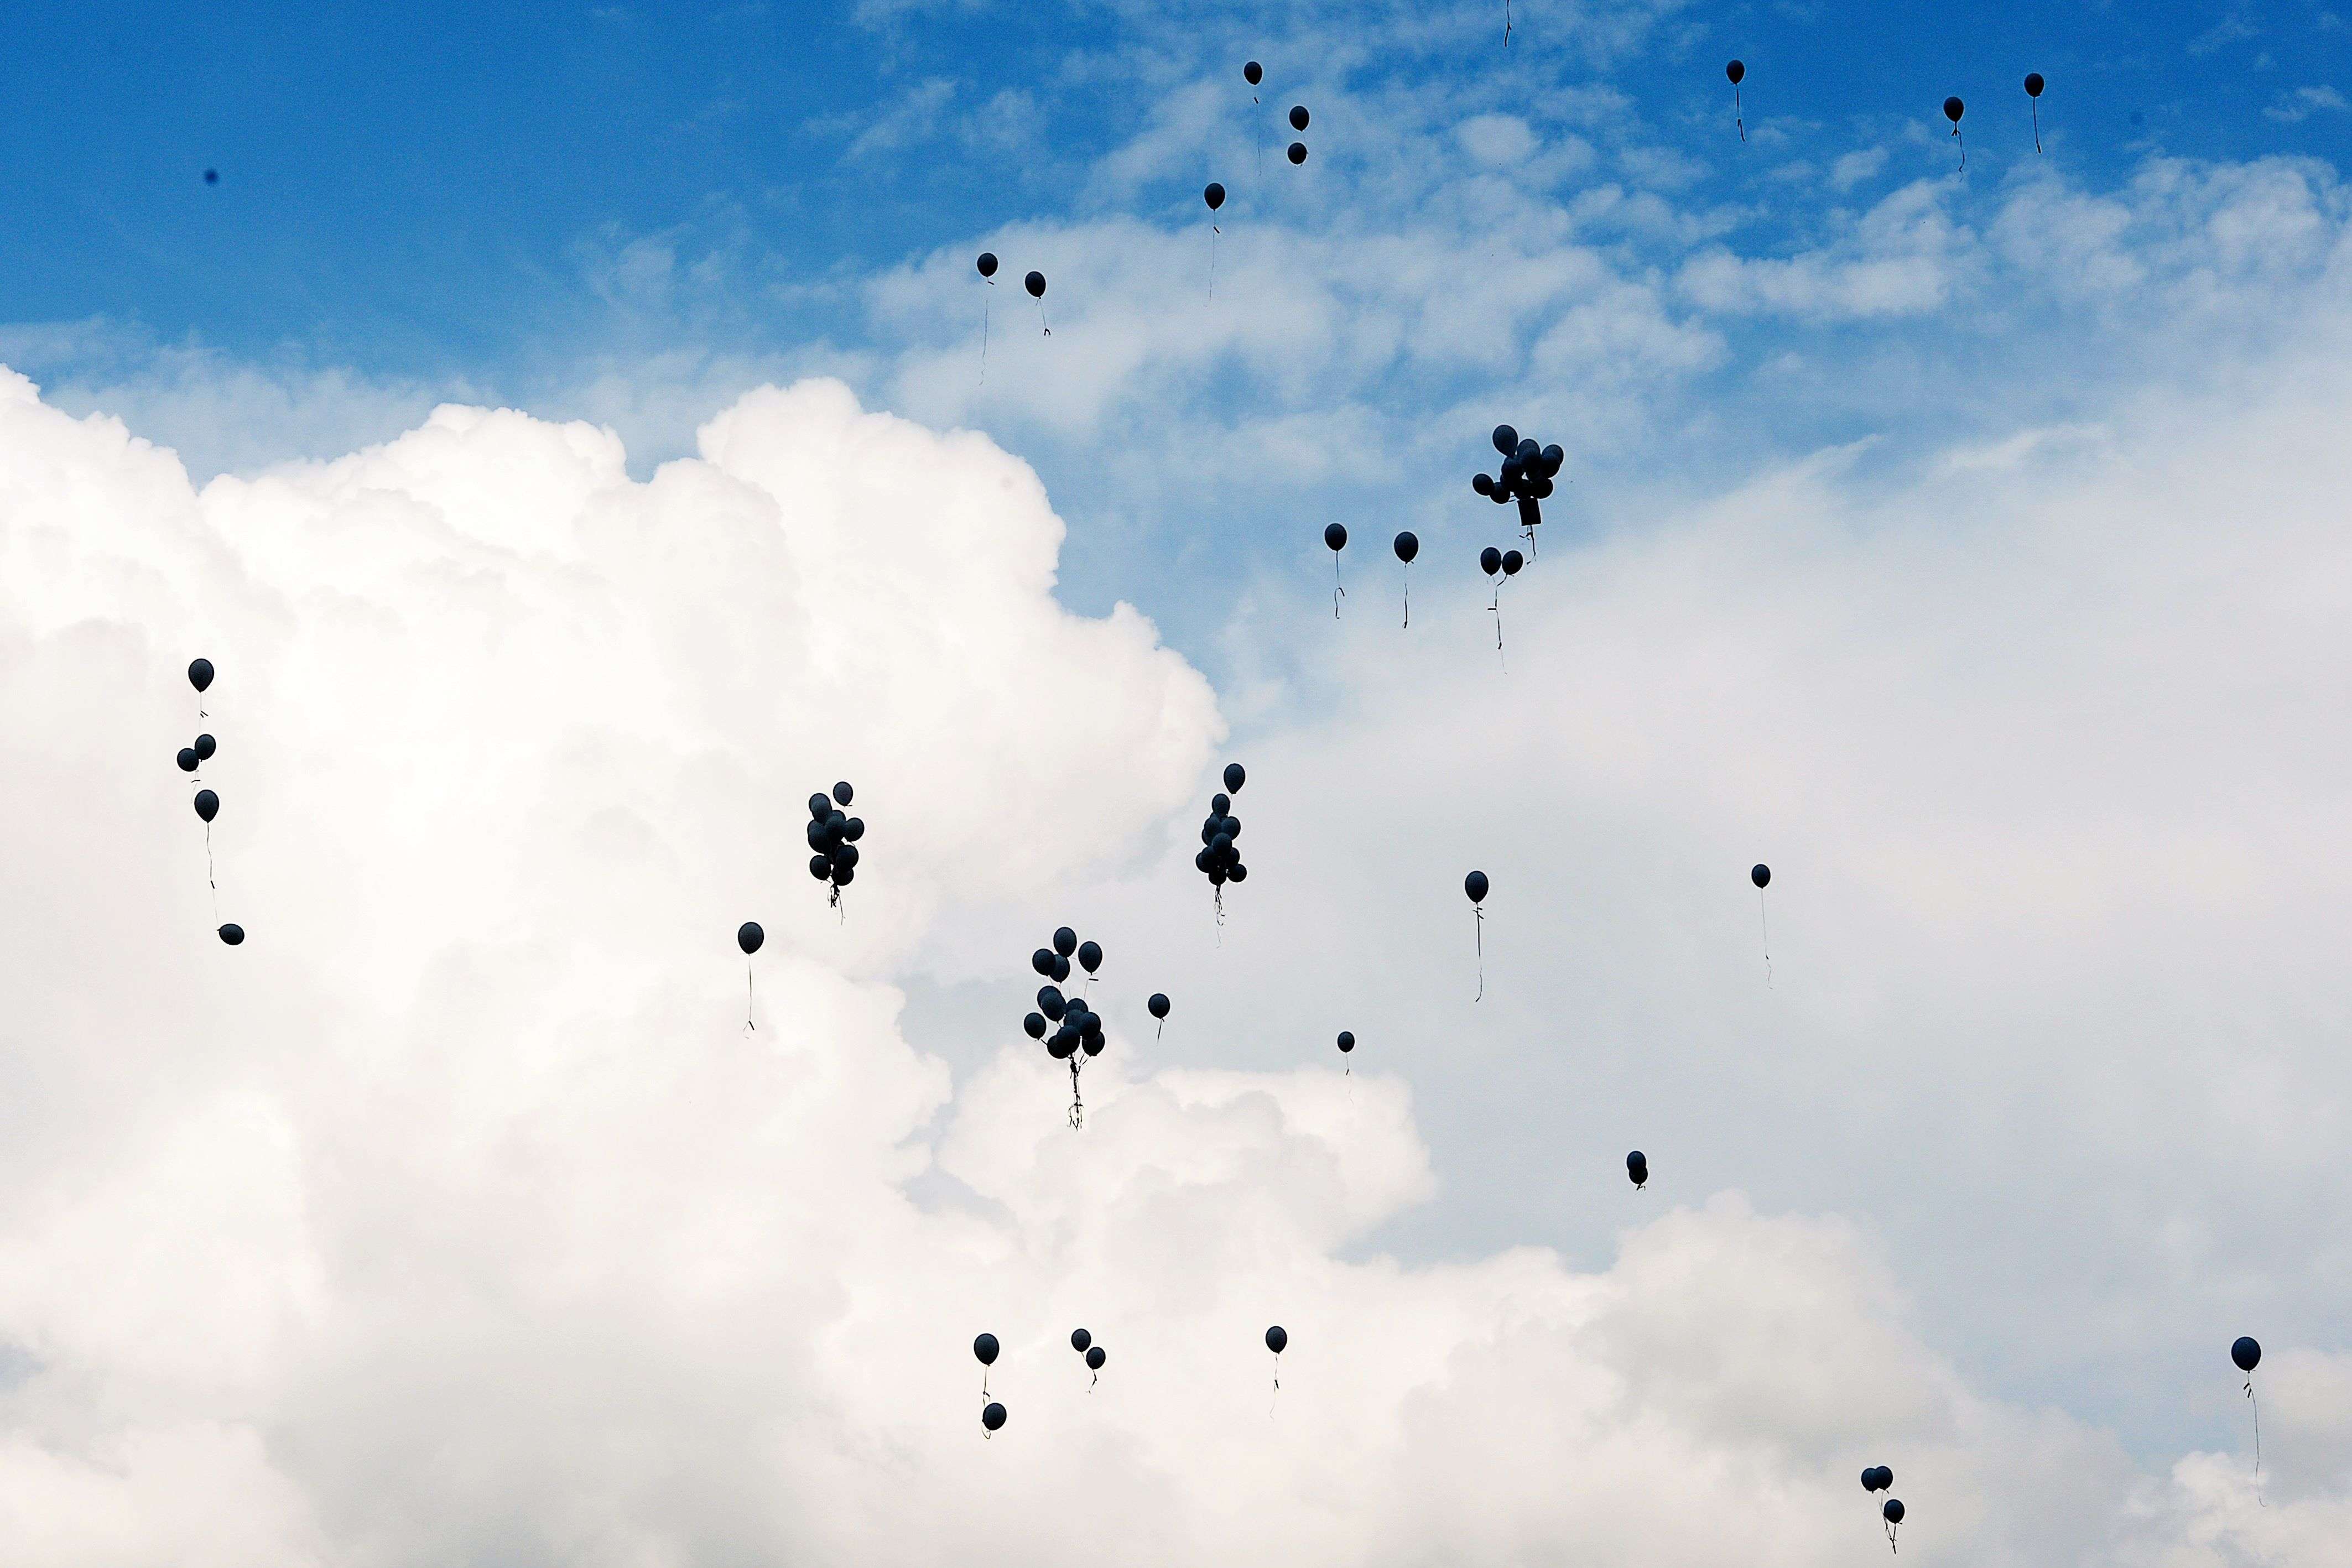 Family members and relatives of the victims of the crash of the Germanwings plane throw 149 white balloons during a ceremony in Le Vernet, southern France. An inter-religious service will be held today in honour of the victims of the Germanwings crash over the French Alps, including the burial of some of the remains that haven't yet been identified. (AFP/Boris Horvat) 